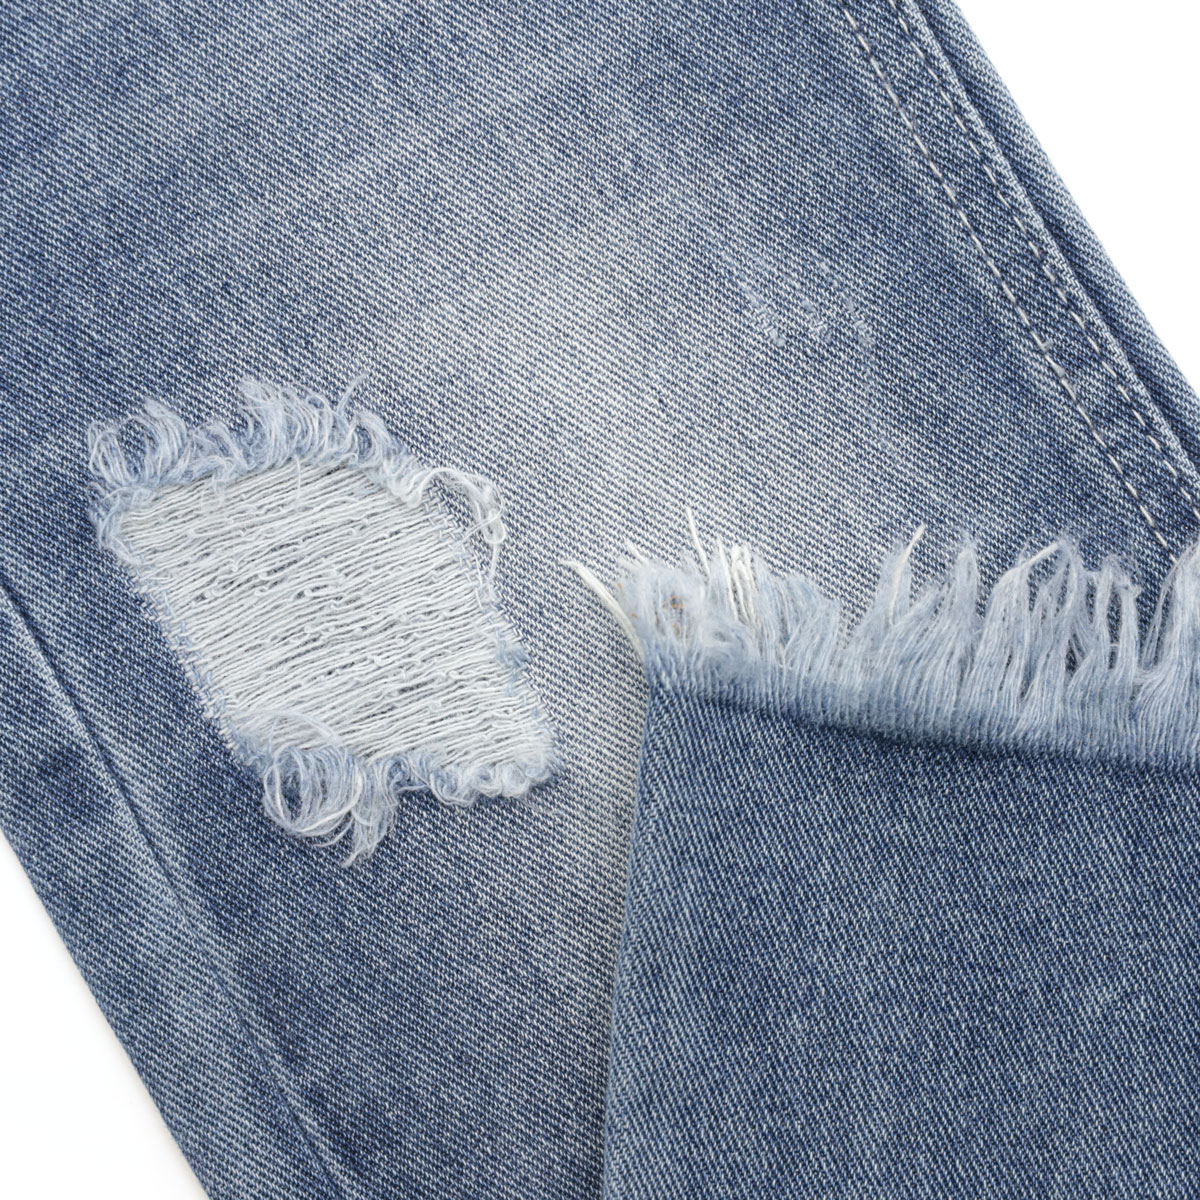 Do Jeans Companies Buy Or Make Their Own Denim? 1